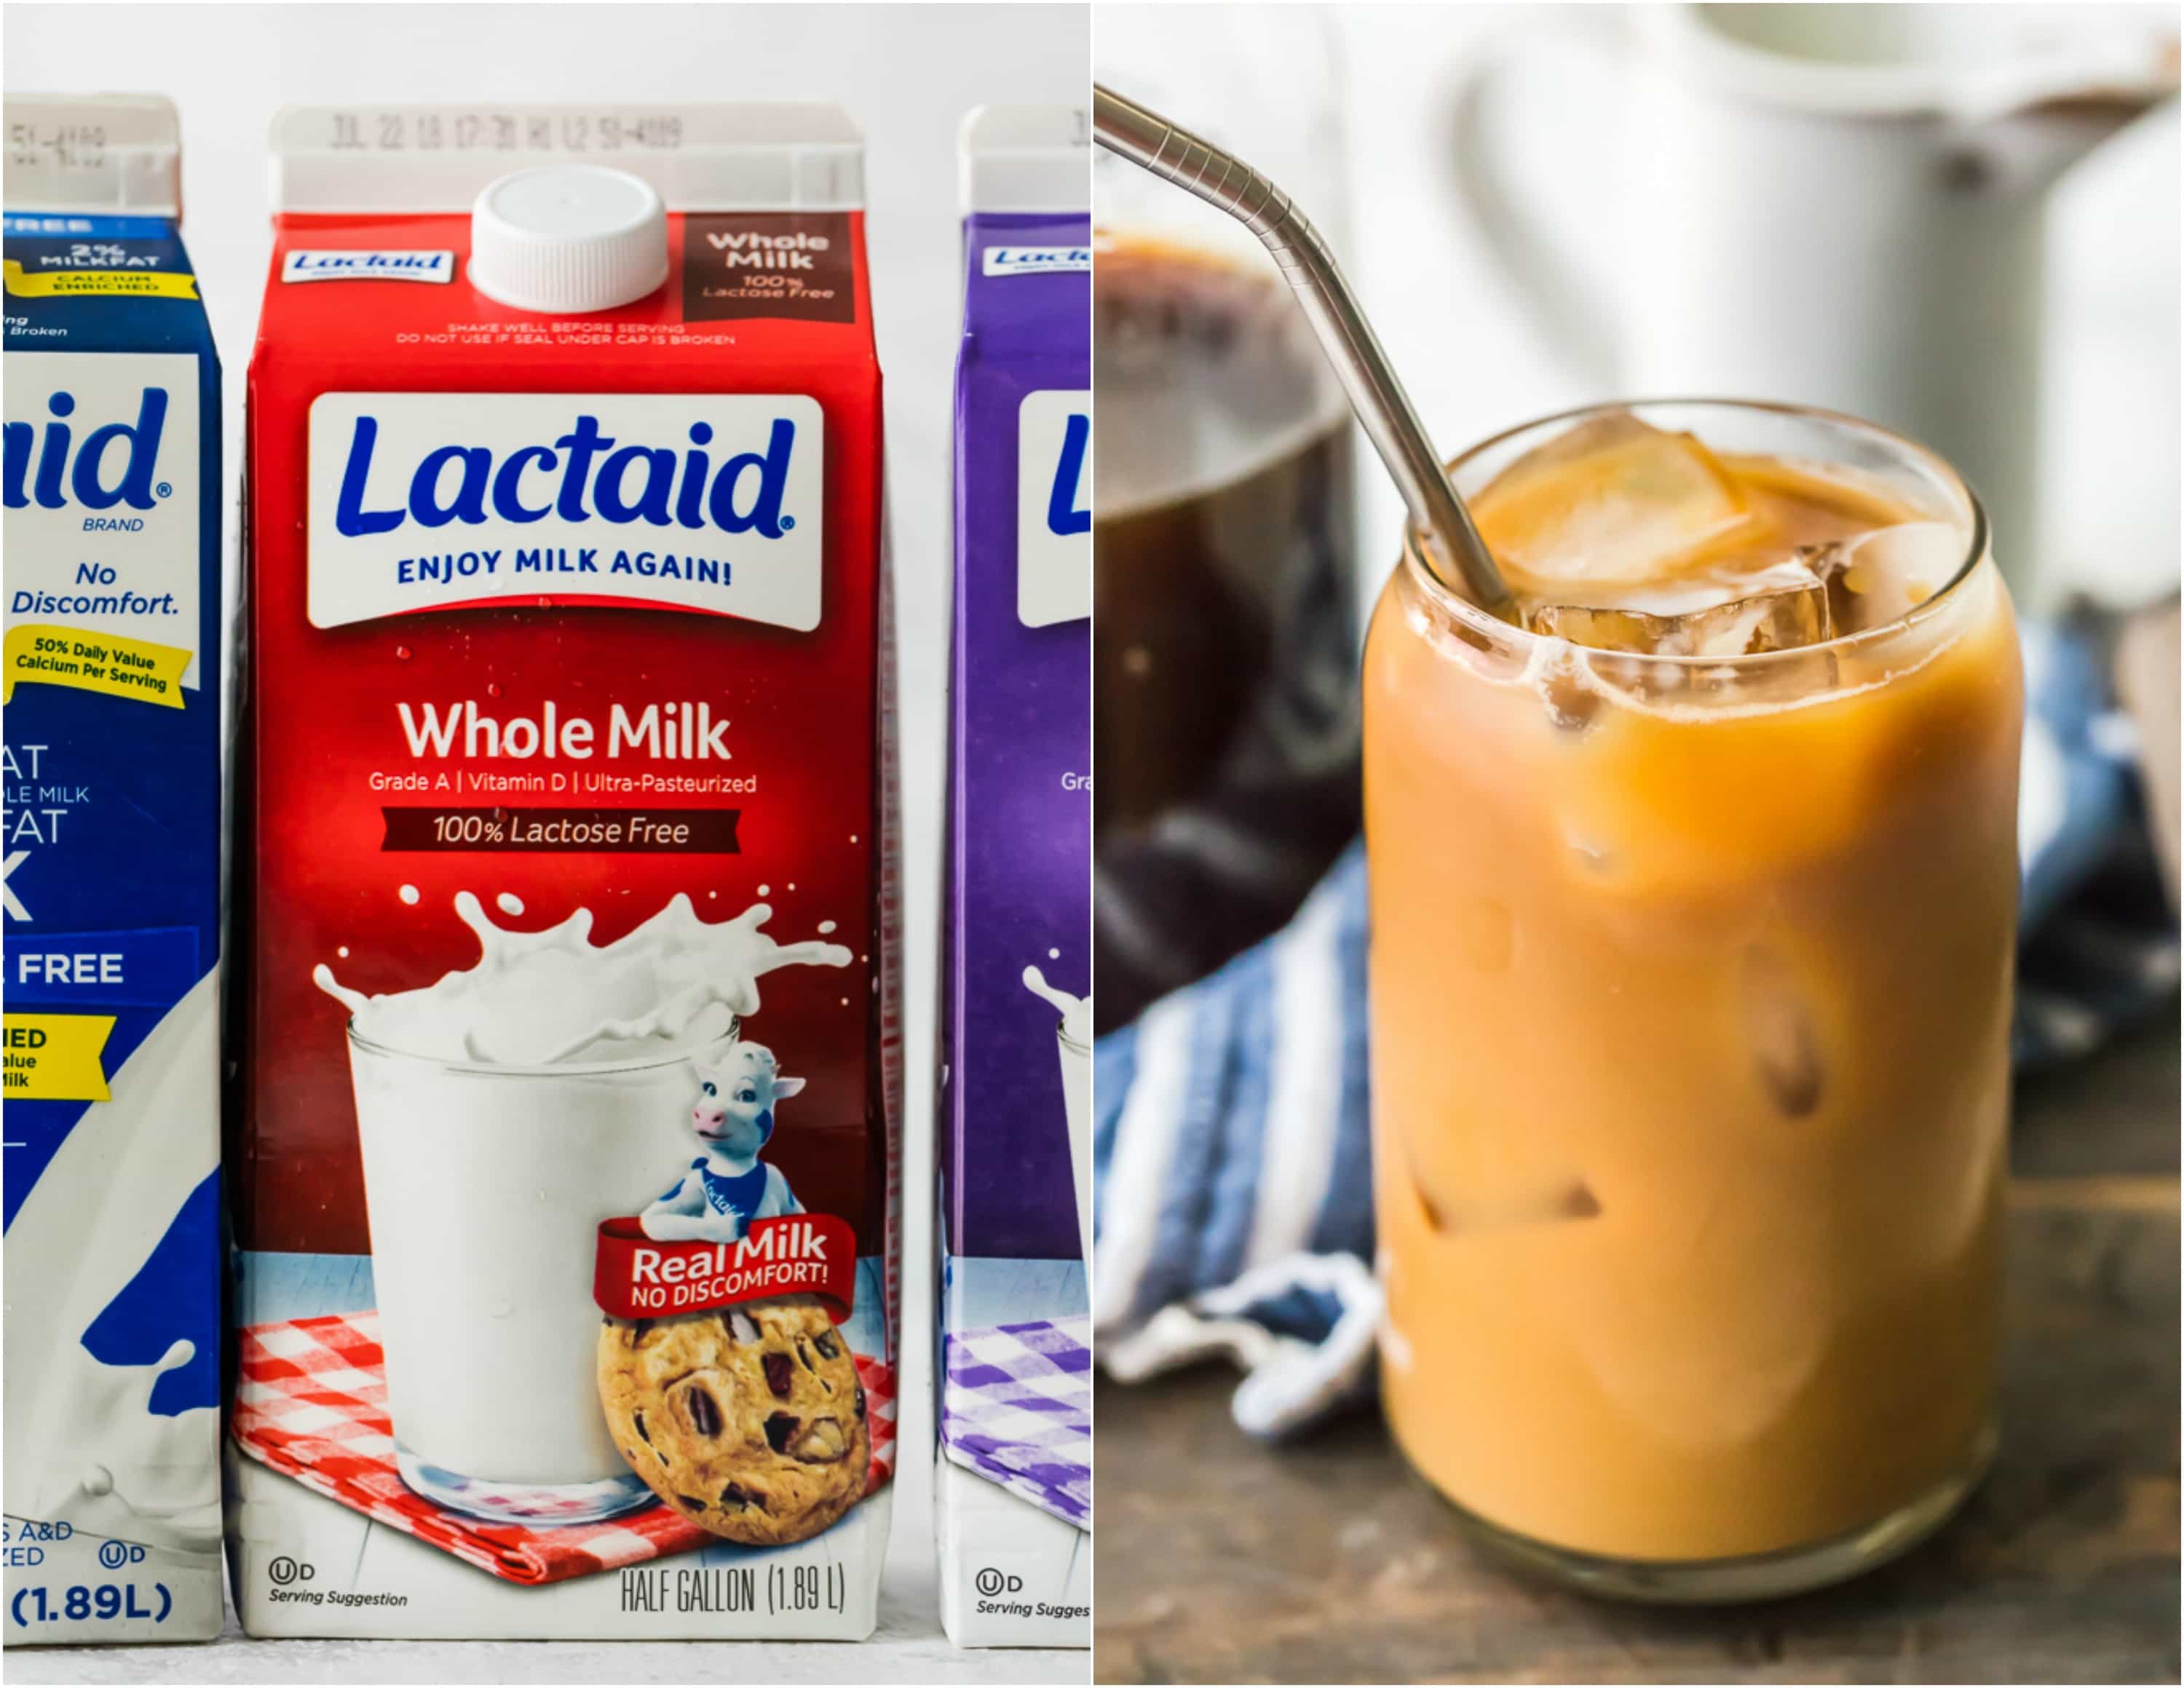 Container of lactaid milk and coffee